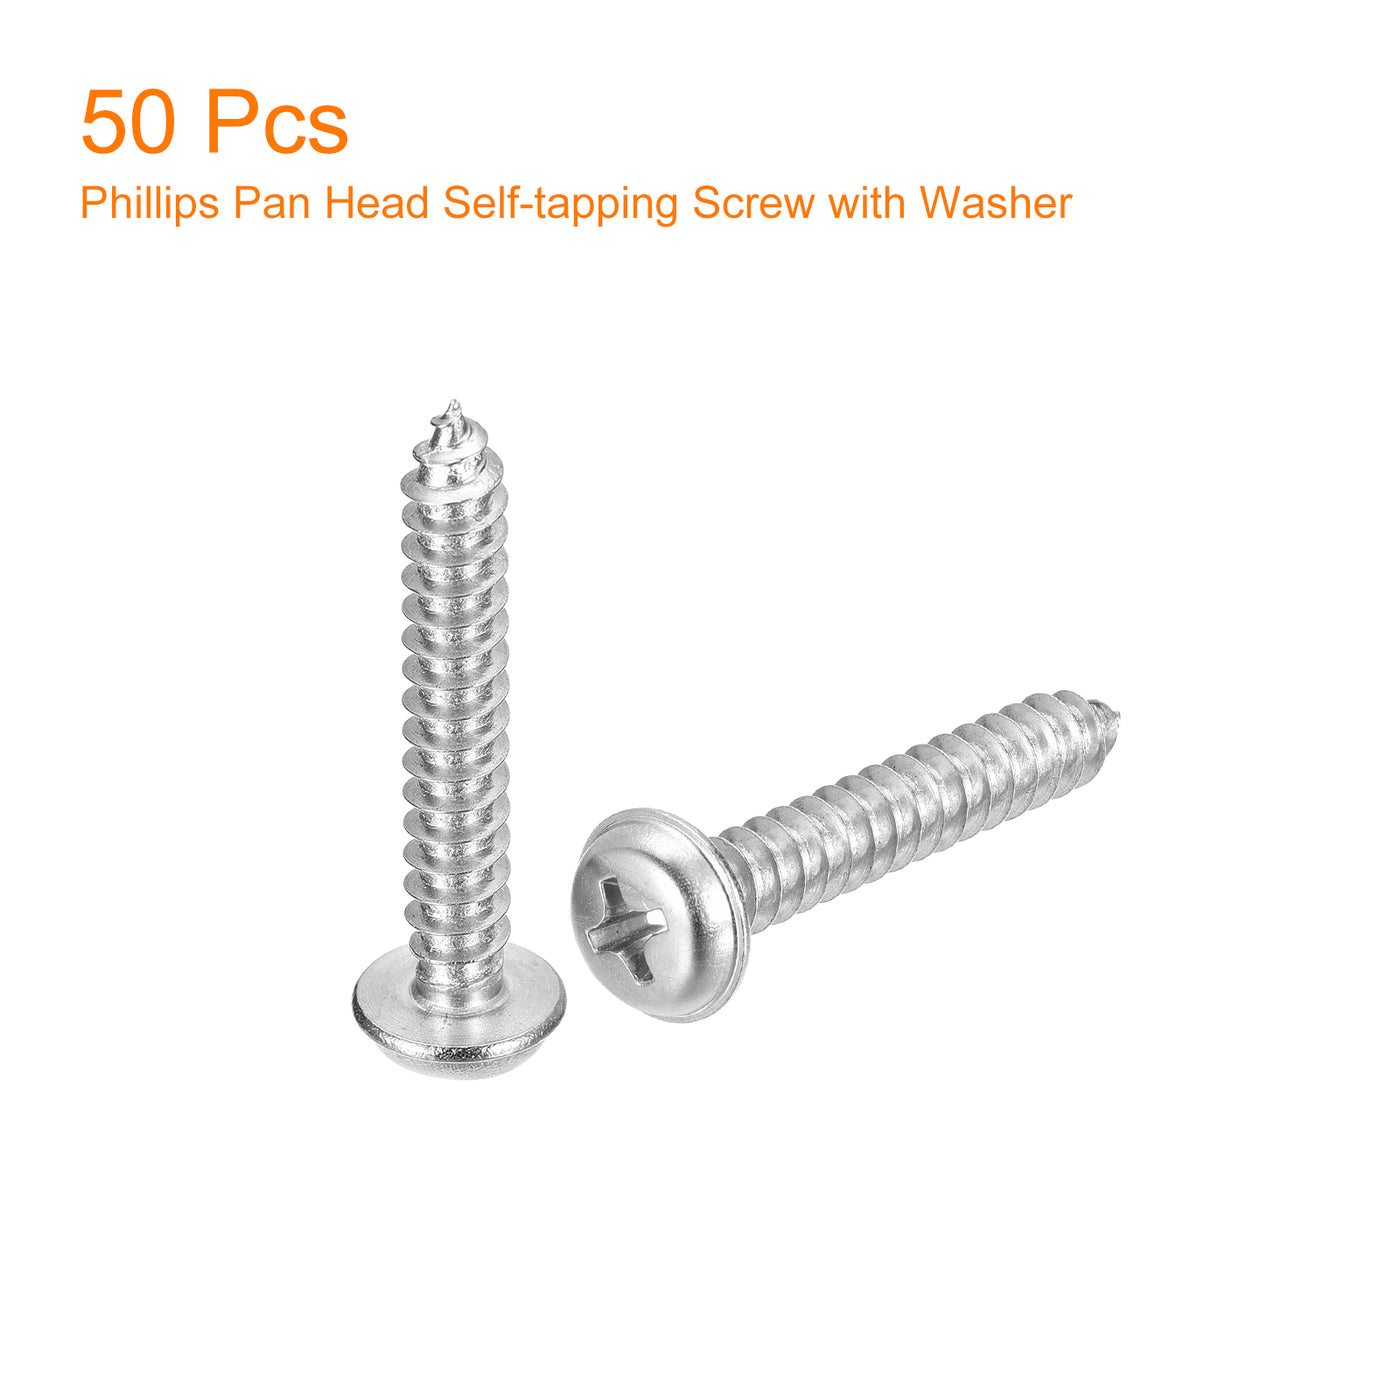 uxcell Uxcell ST5x30mm Phillips Pan Head Self-tapping Screw with Washer, 50pcs - 304 Stainless Steel Wood Screw Full Thread (Silver)